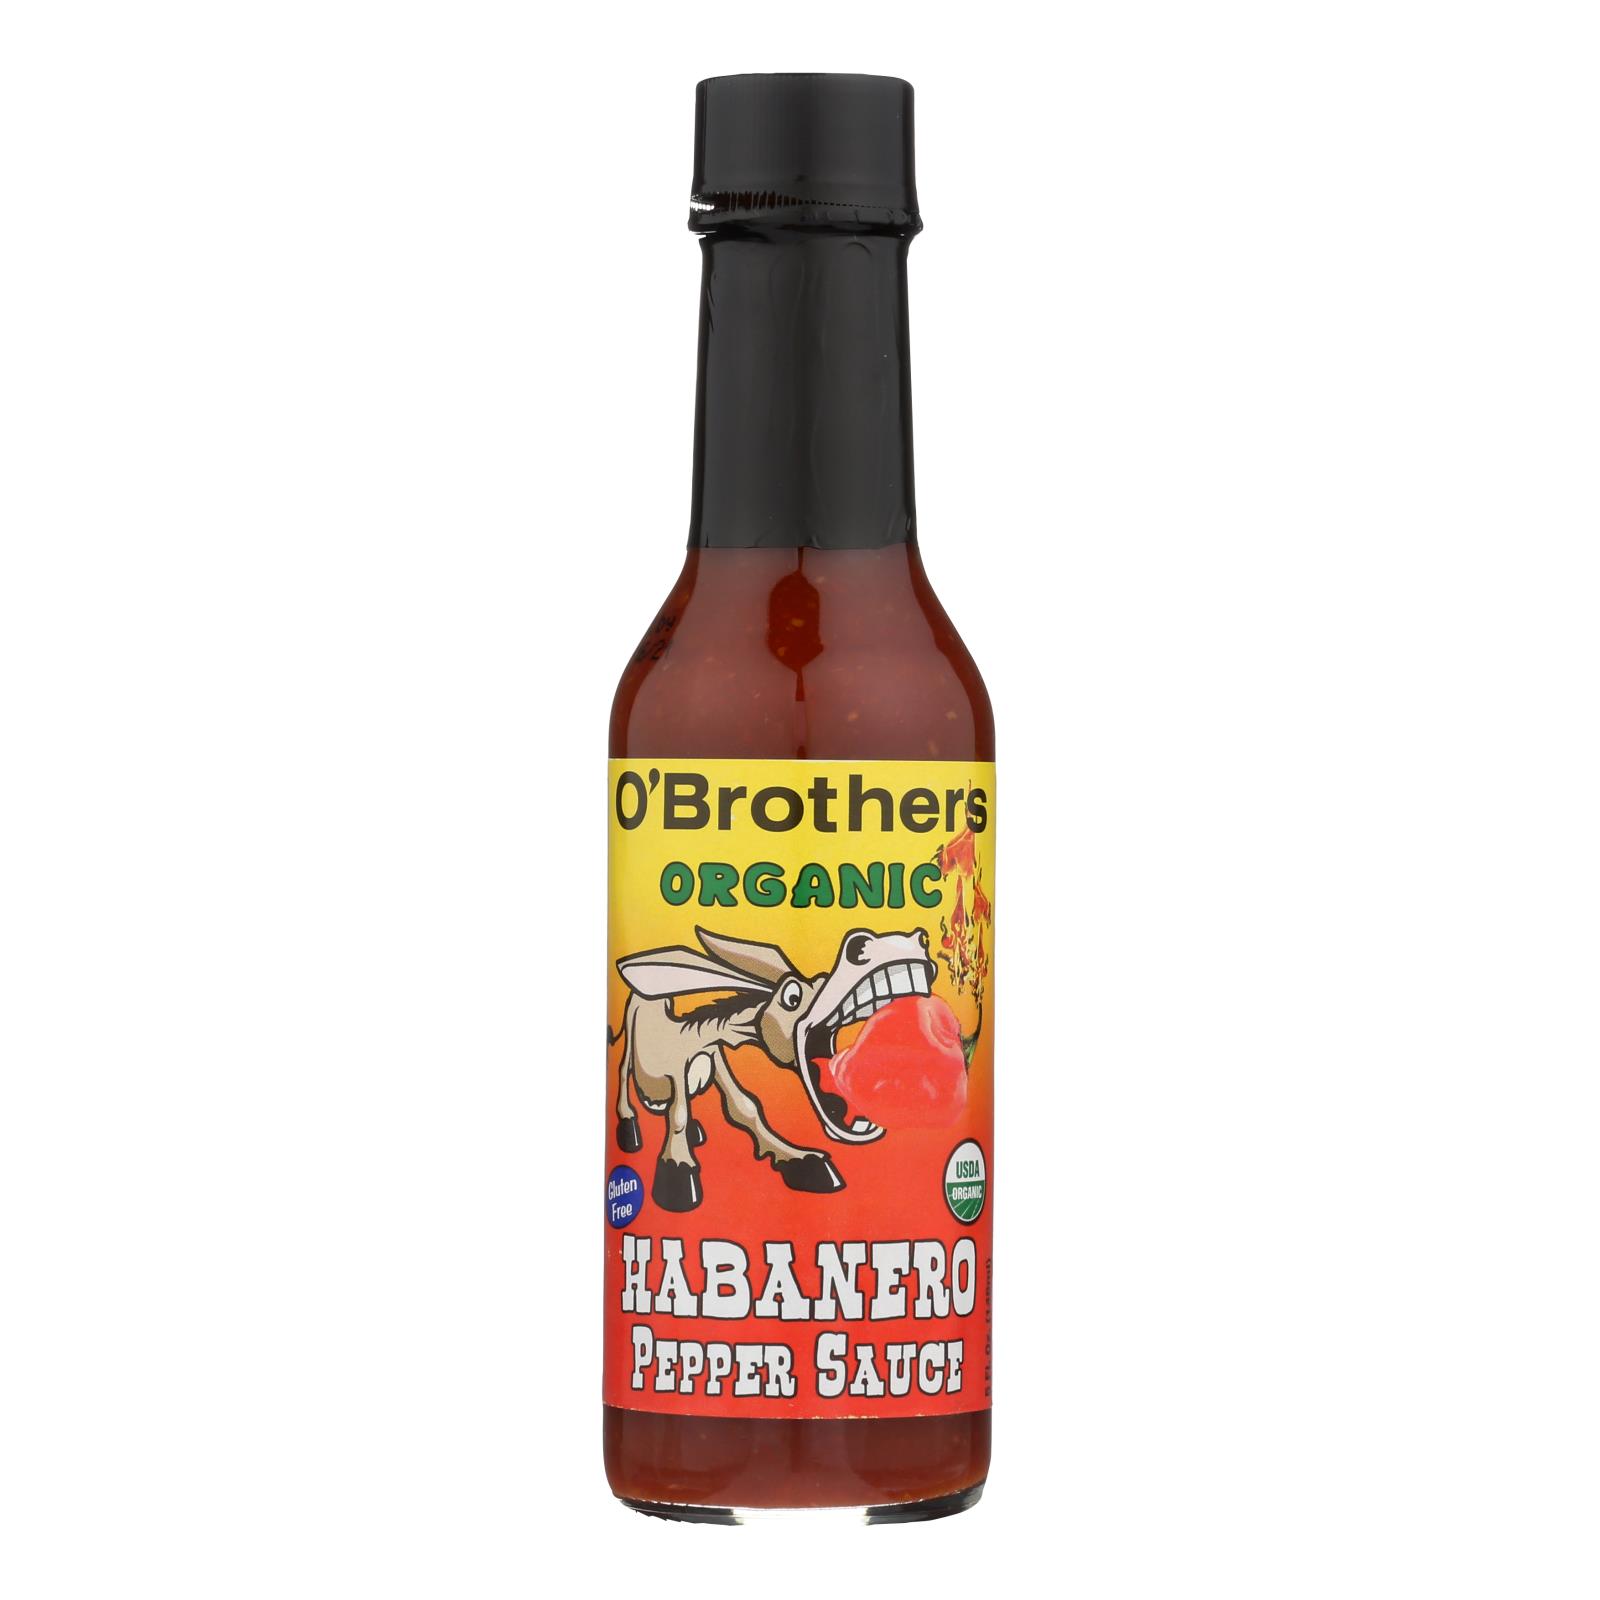 O'Brothers Hot Sauce Habanero Pepper Sauce - Case of 12 - 5 FZ